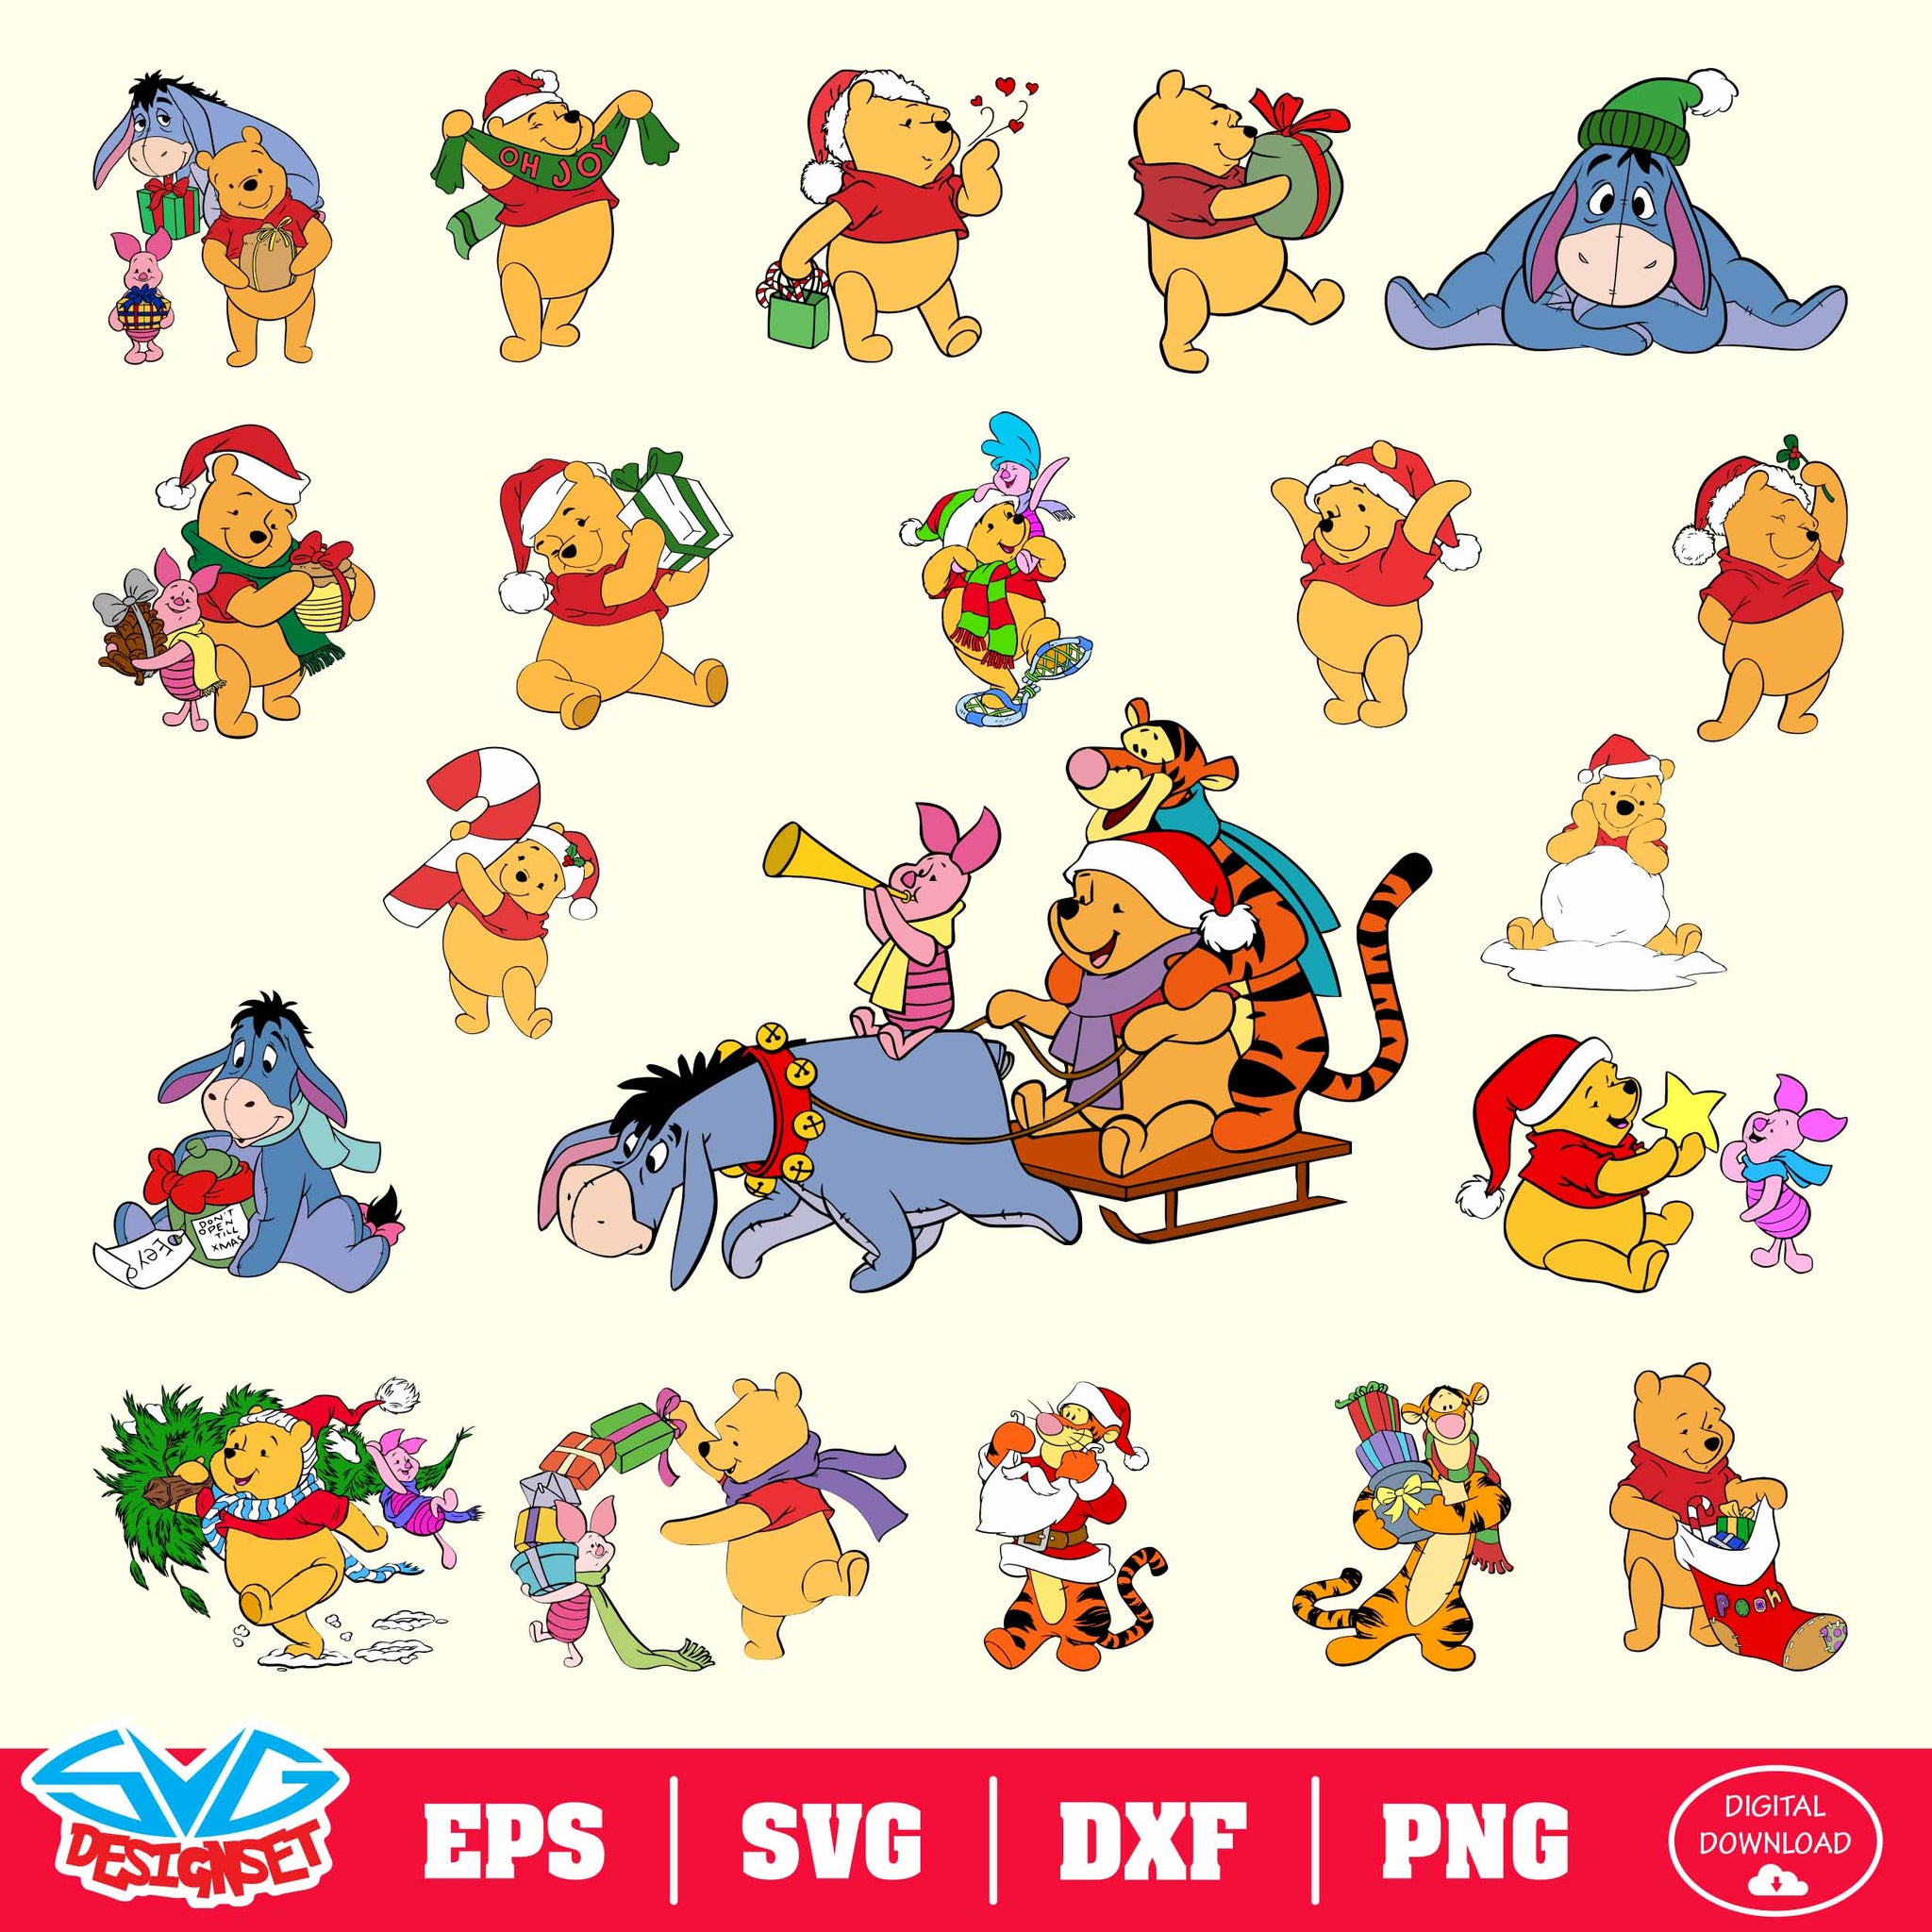 Winnie The Pooh Christmas Bundle Svg, Dxf, Eps, Png, Clipart, Silhouette and Cutfiles #001 - SVGDesignSets